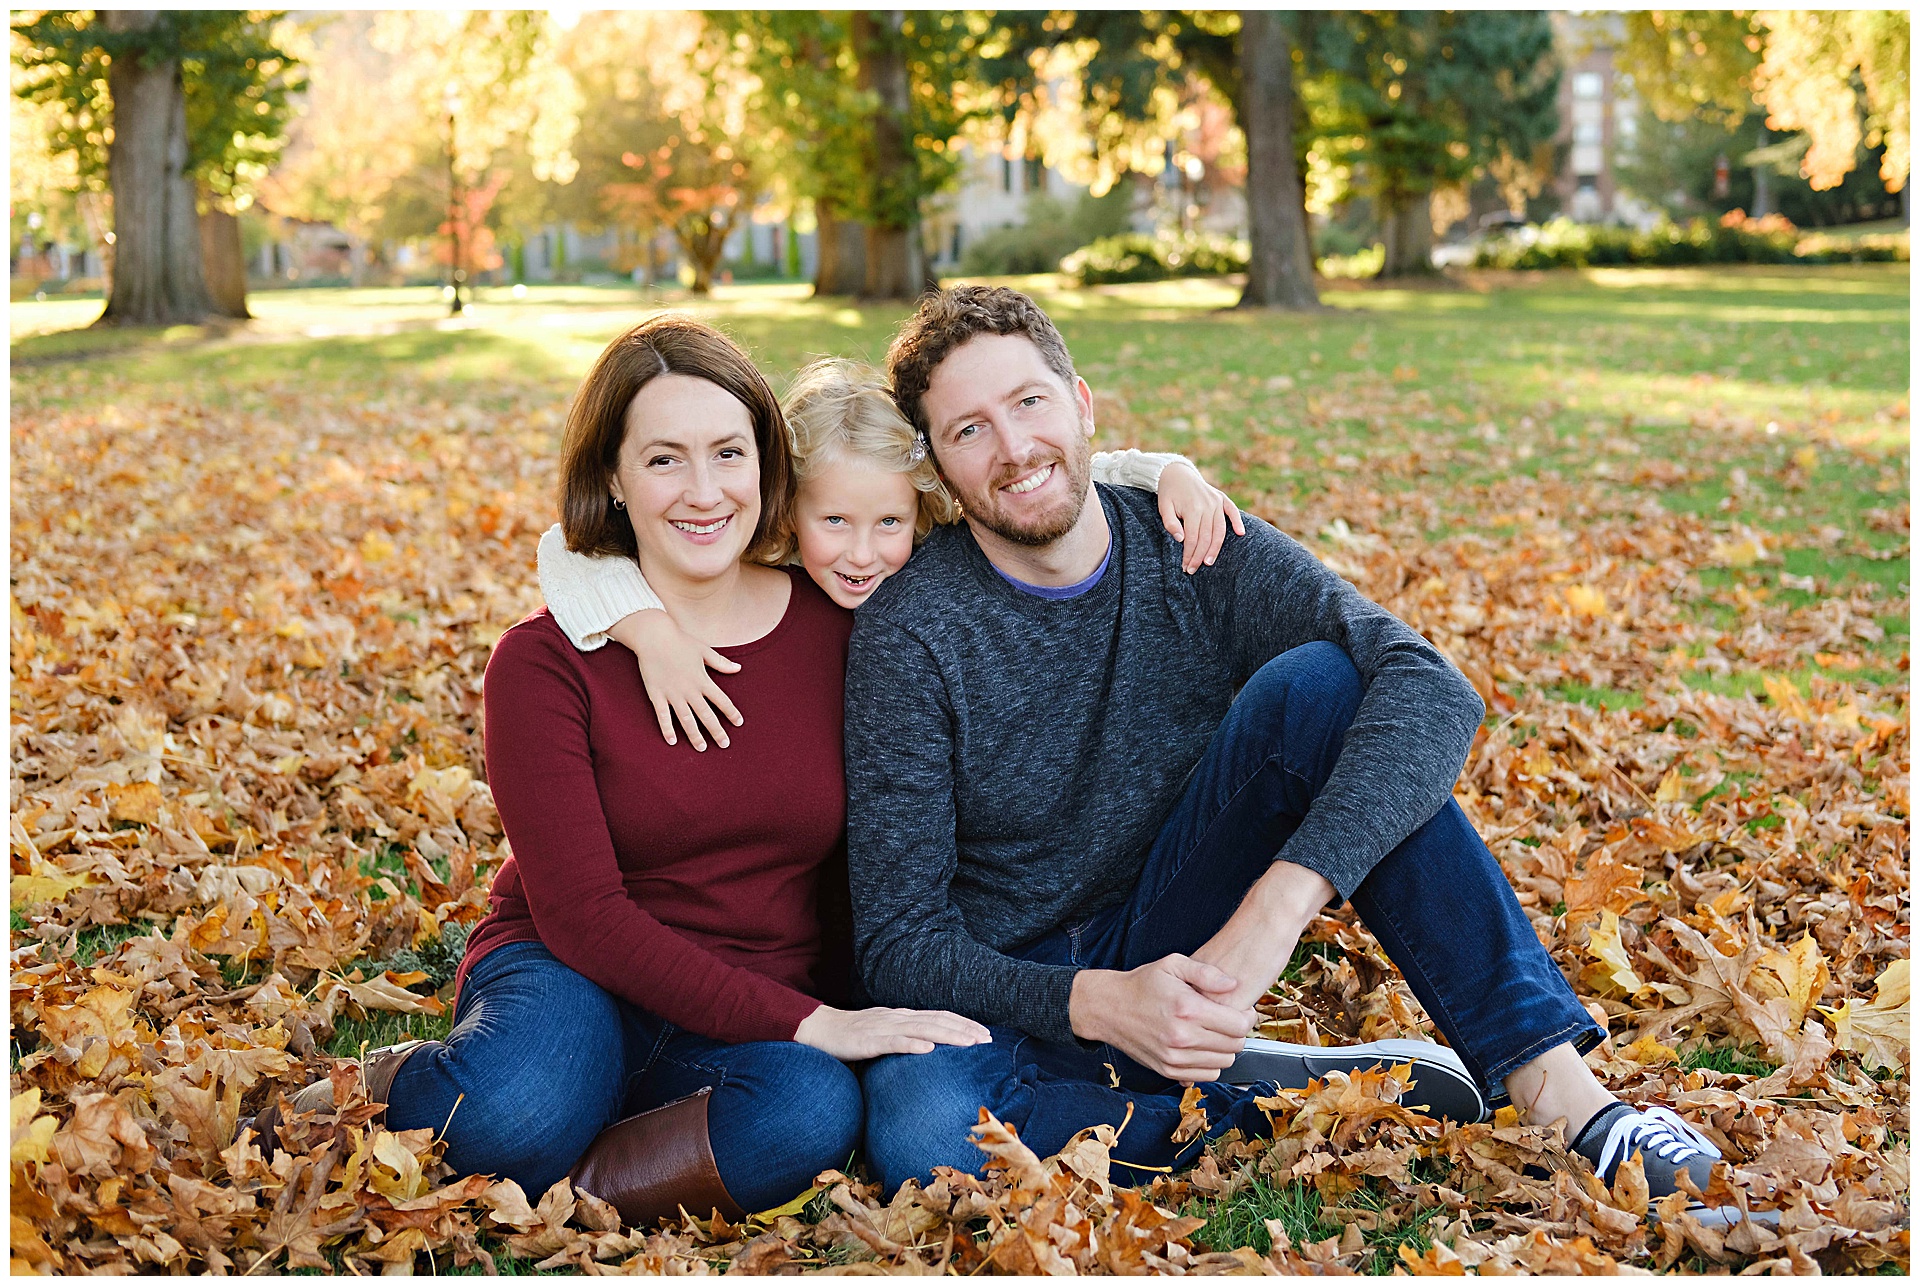 Outdoor family portrait in Corvallis Oregon by Portland photographer Alison Smith